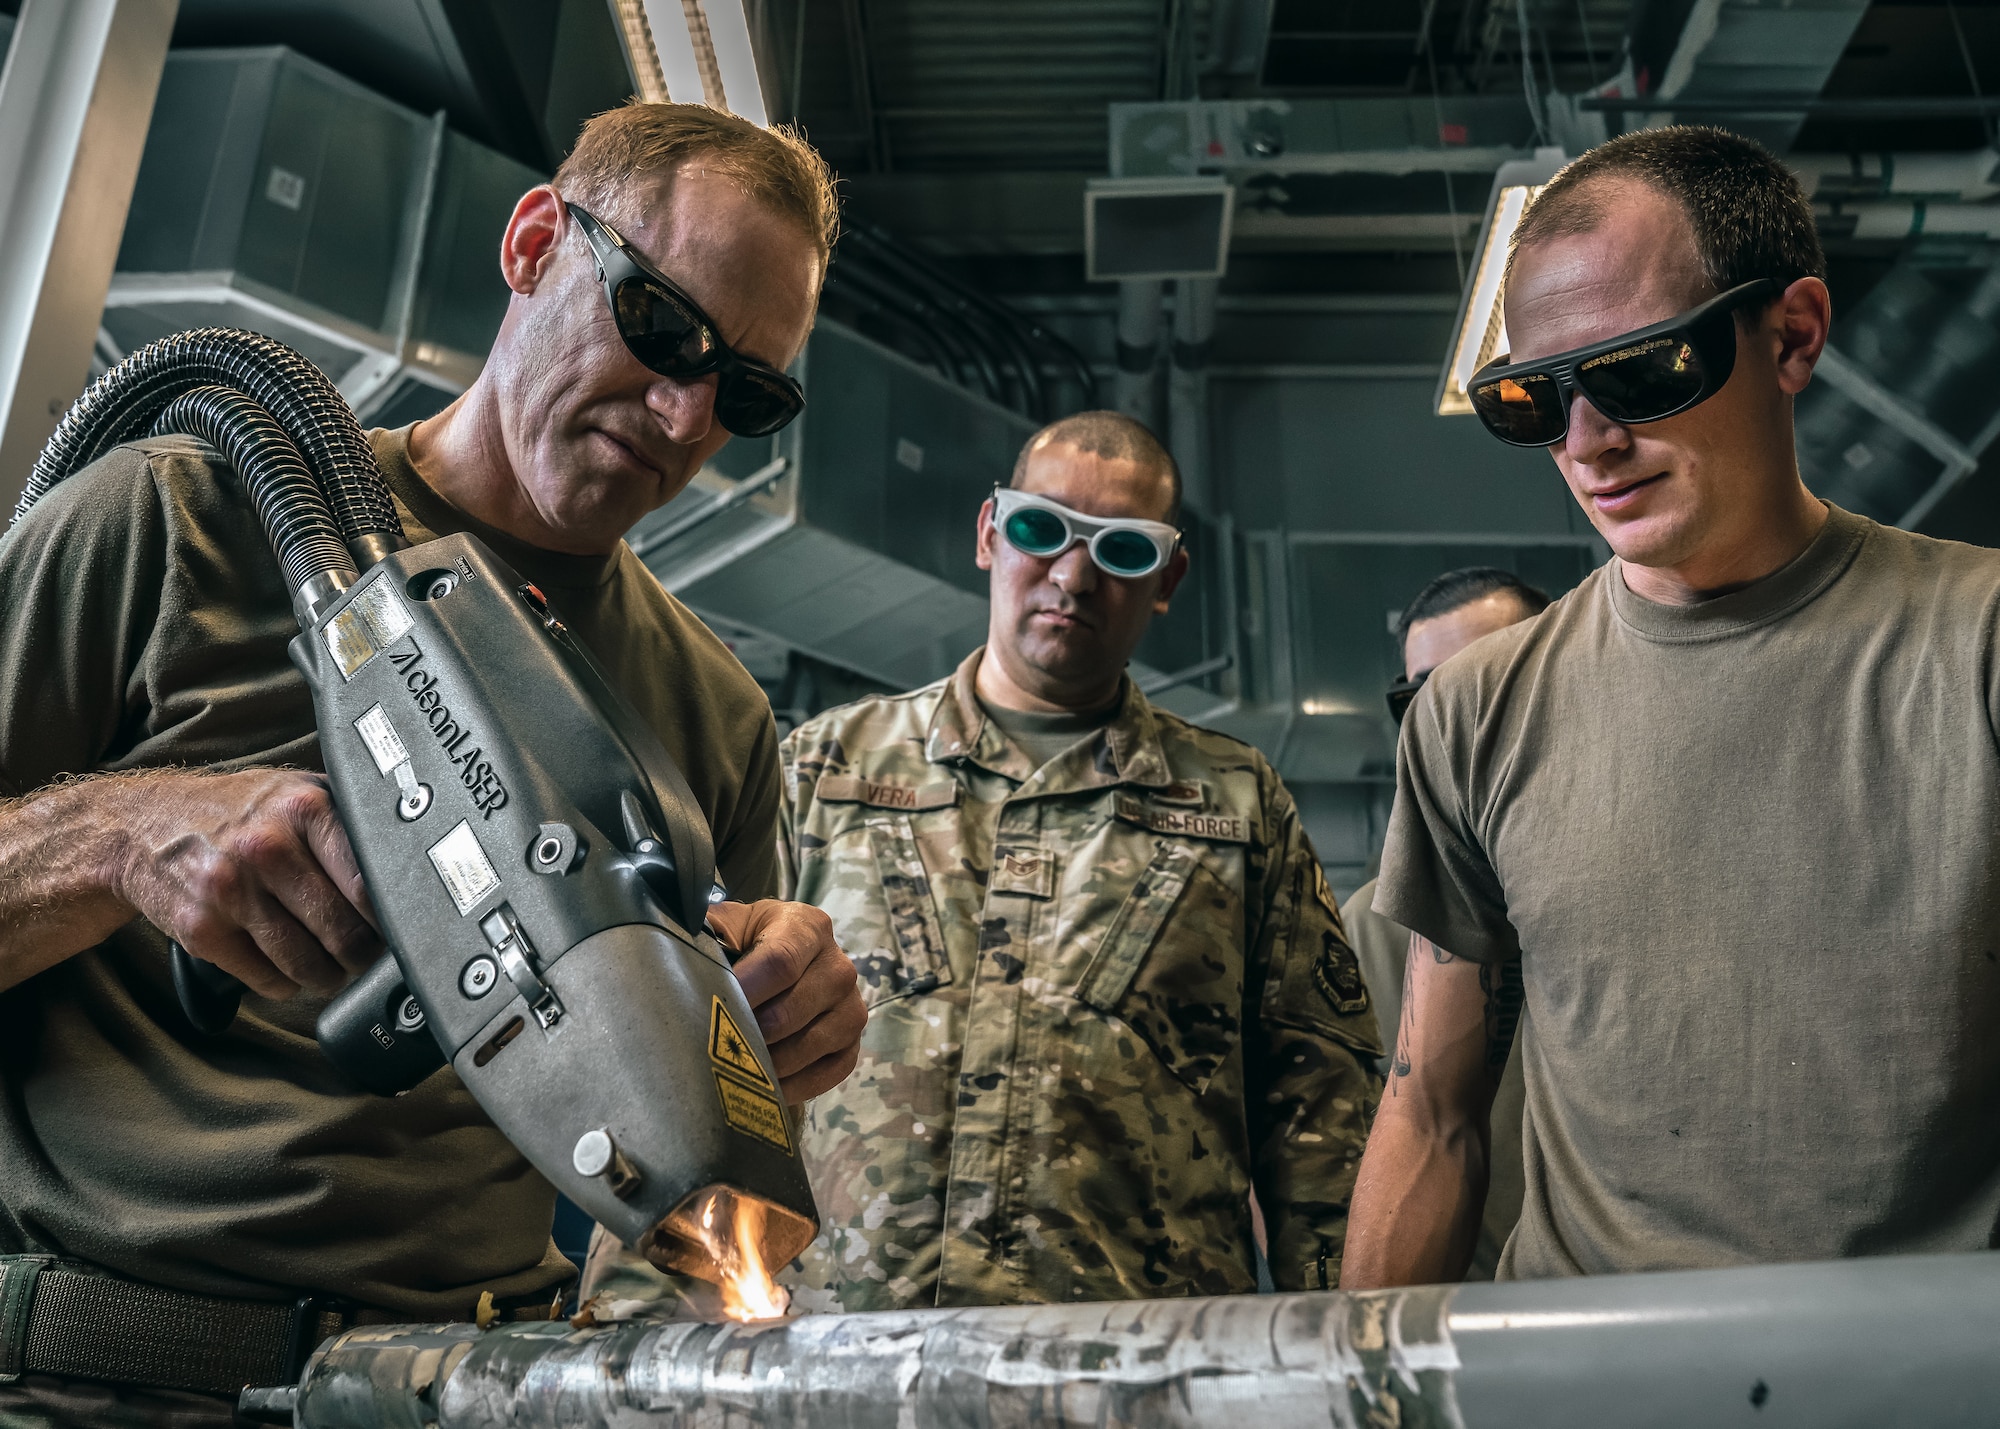 U.S. Air Force Col. Benjamin Jonsson, left, 6th Air Refueling Wing commander, learns how to use a CL2000 laser as a part of a visit with the 6th Maintenance Squadron corrosion control unit at MacDill Air Force Base, Florida, April 28, 2022.